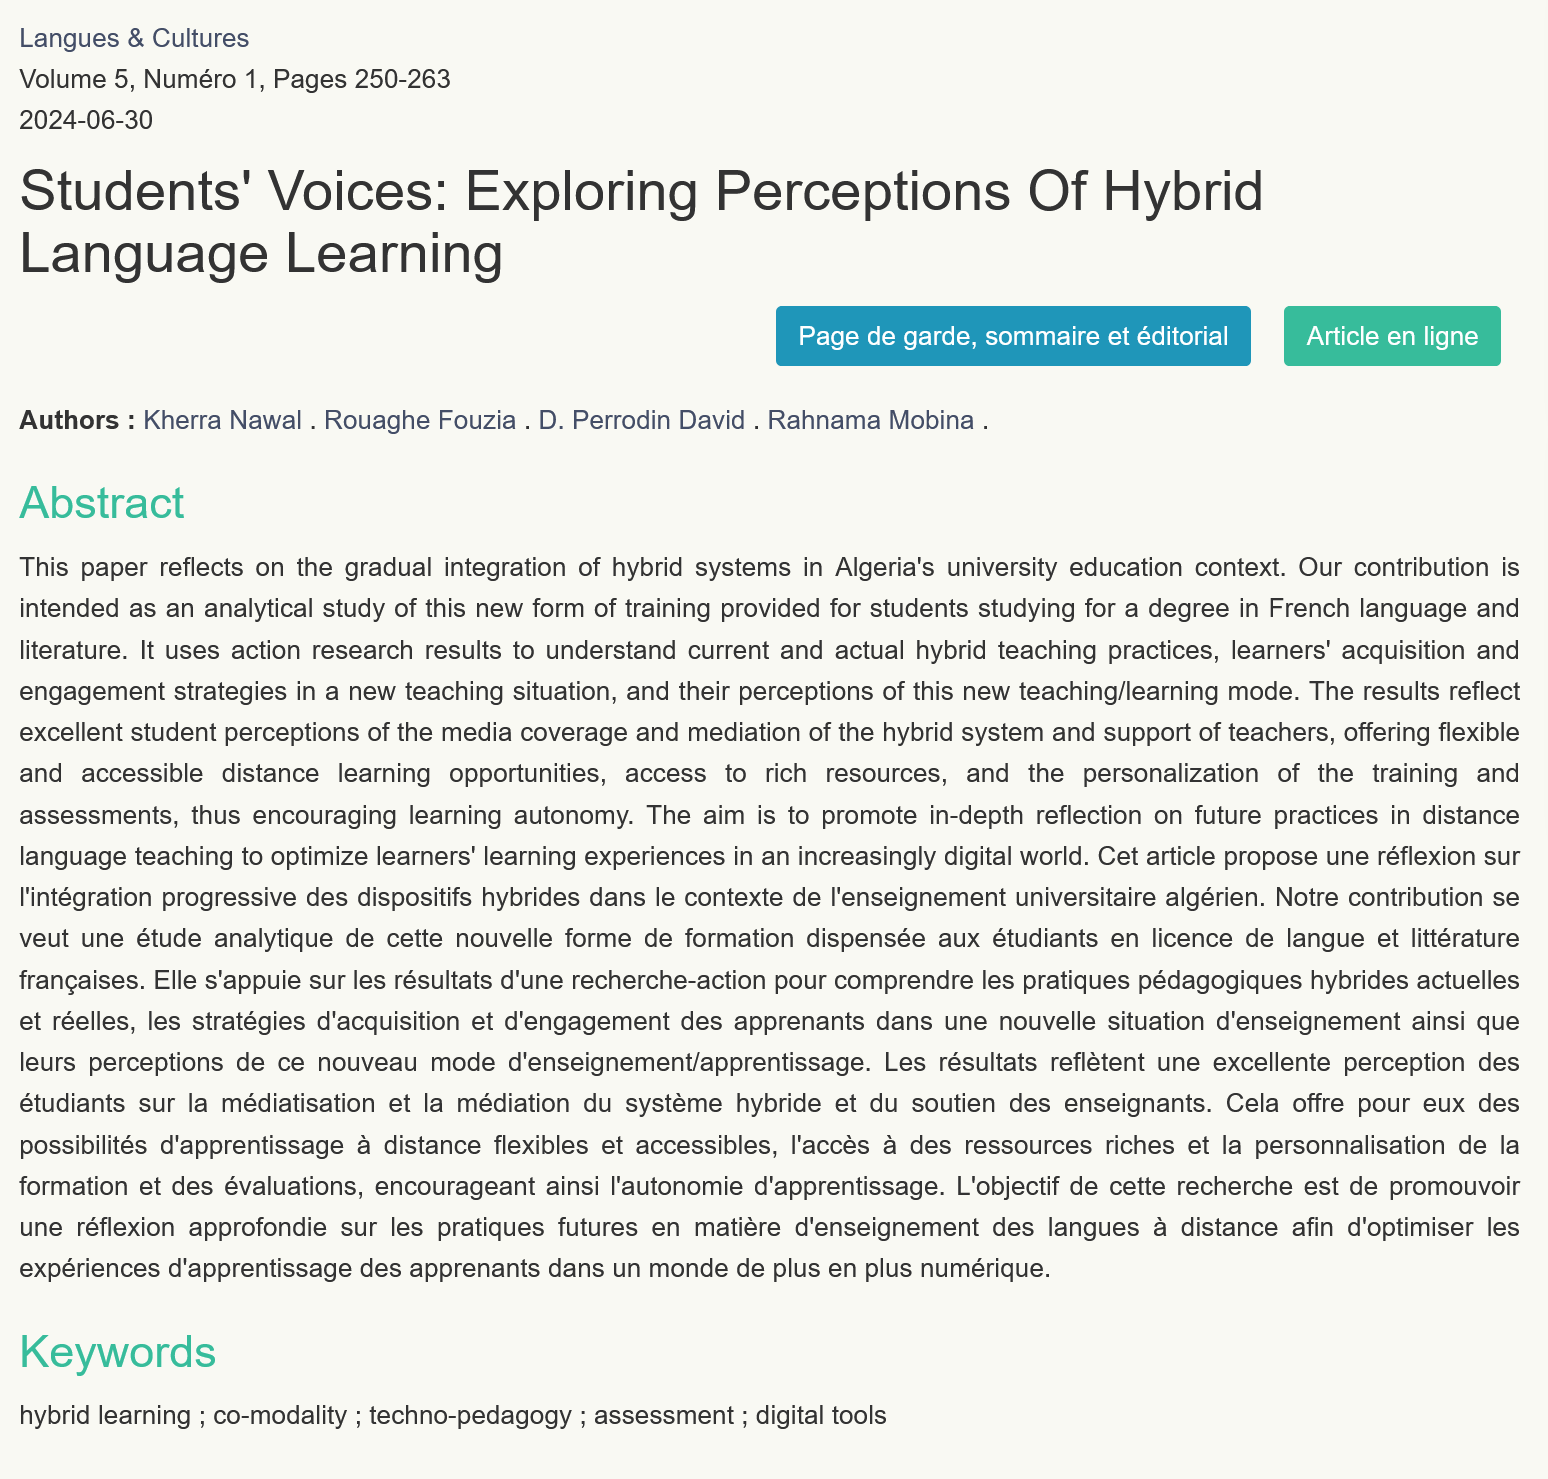 Students’ Voices: Exploring Perceptions Of Hybrid Language Learning